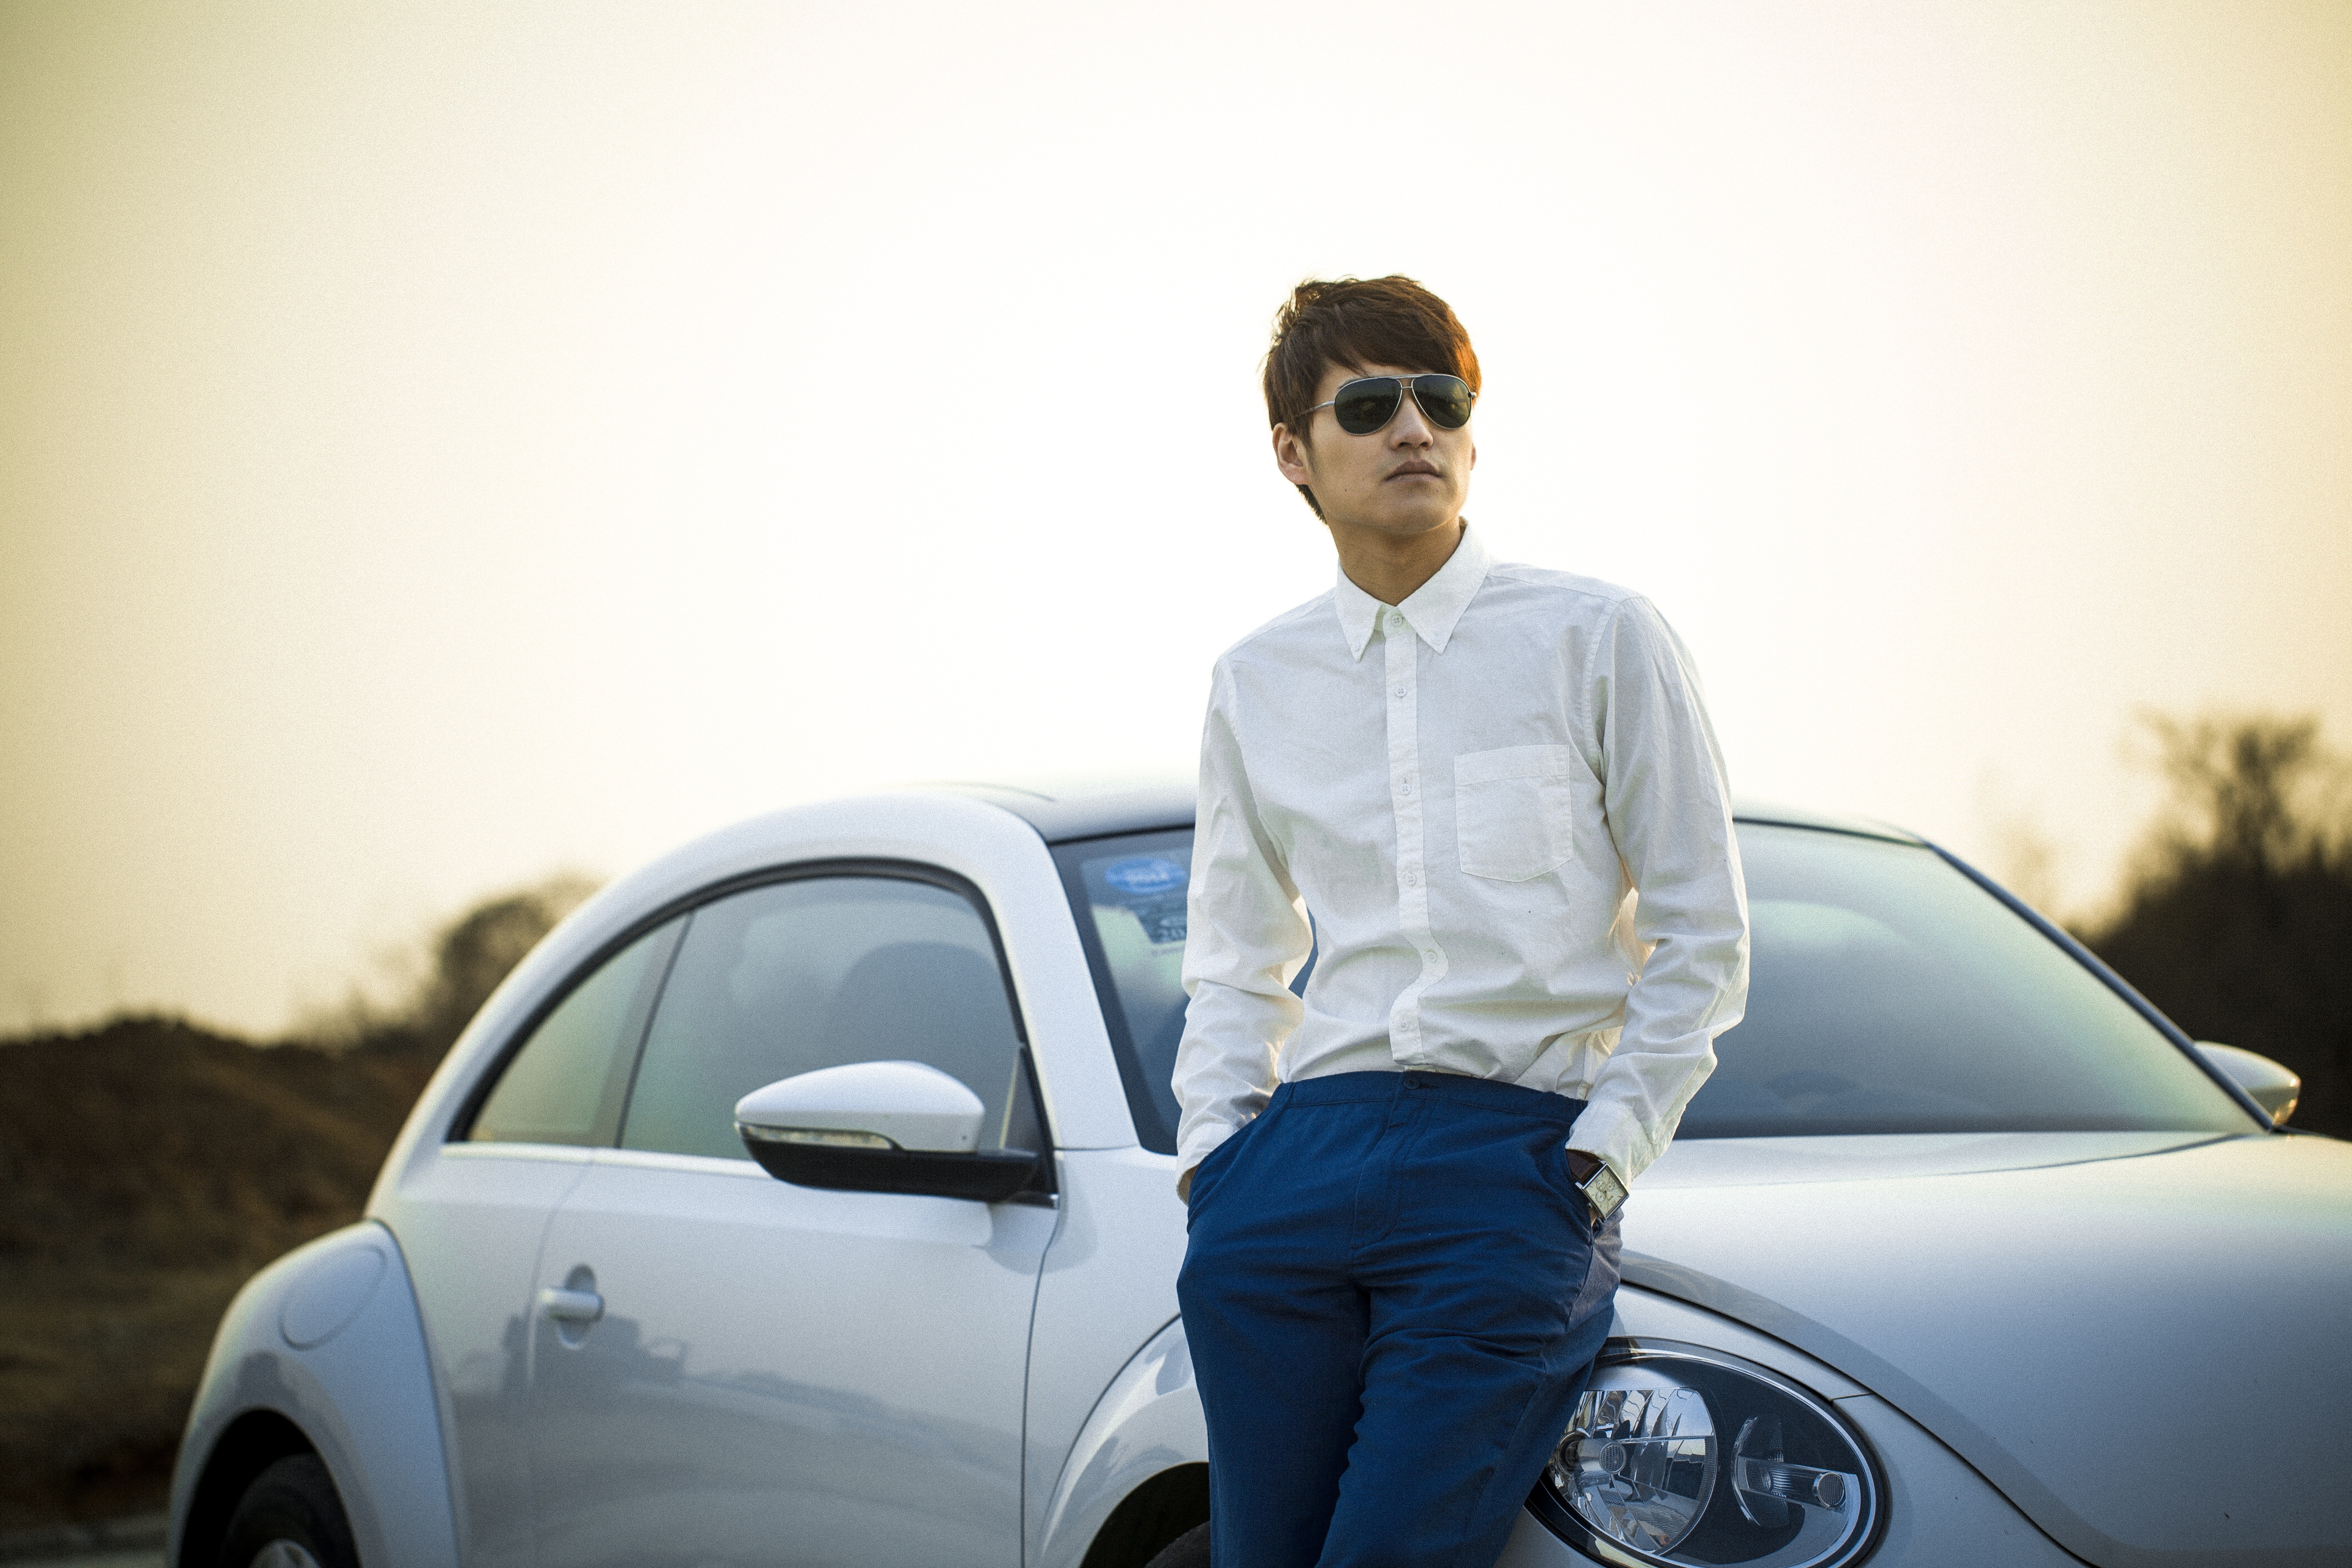 Man in white button down shirt leaning on silver beetle car photo